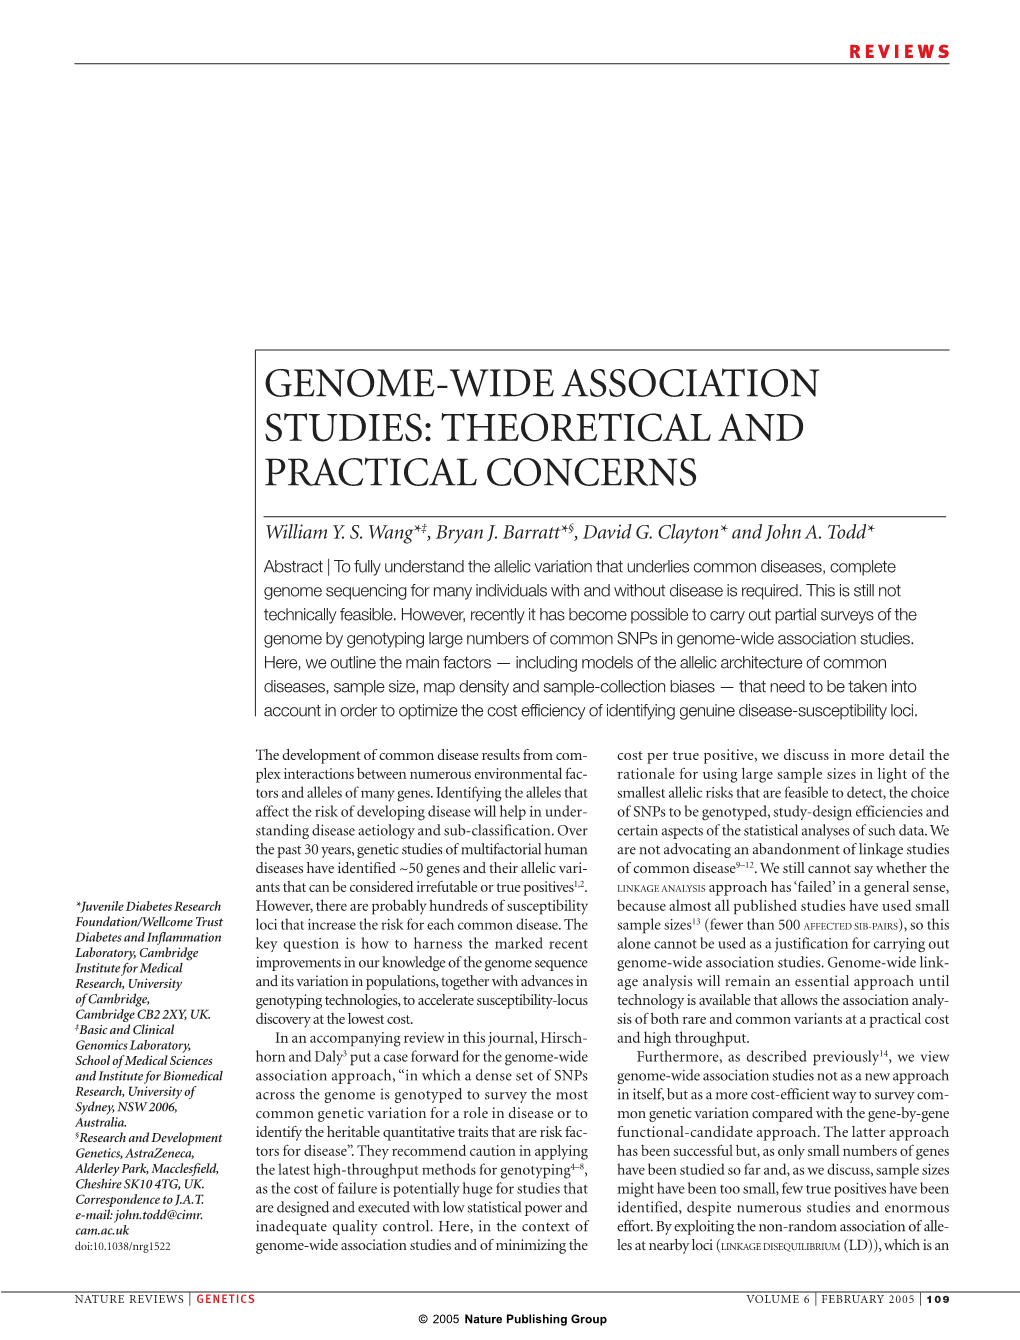 Genome-Wide Association Studies: Theoretical and Practical Concerns